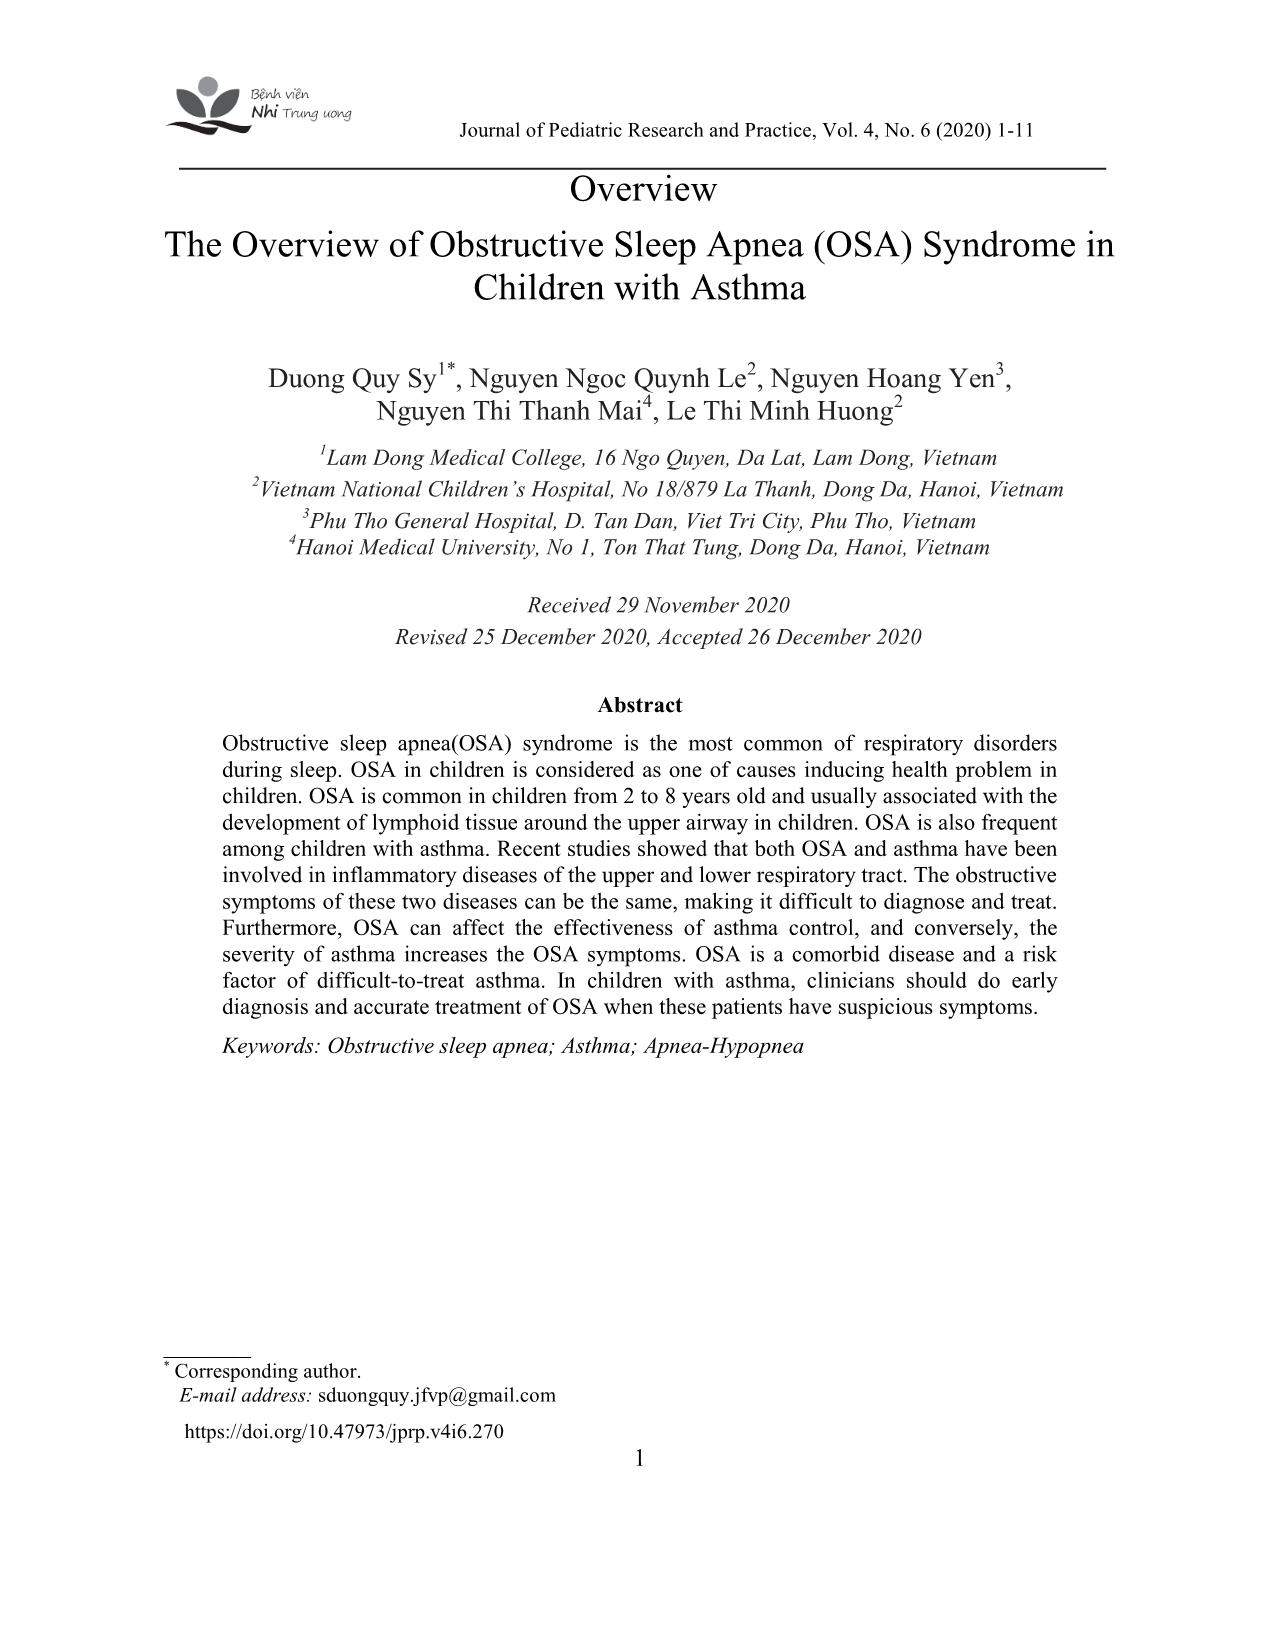 The overview of obstructive sleep apnea (OSA) syndrome in children with asthma trang 1